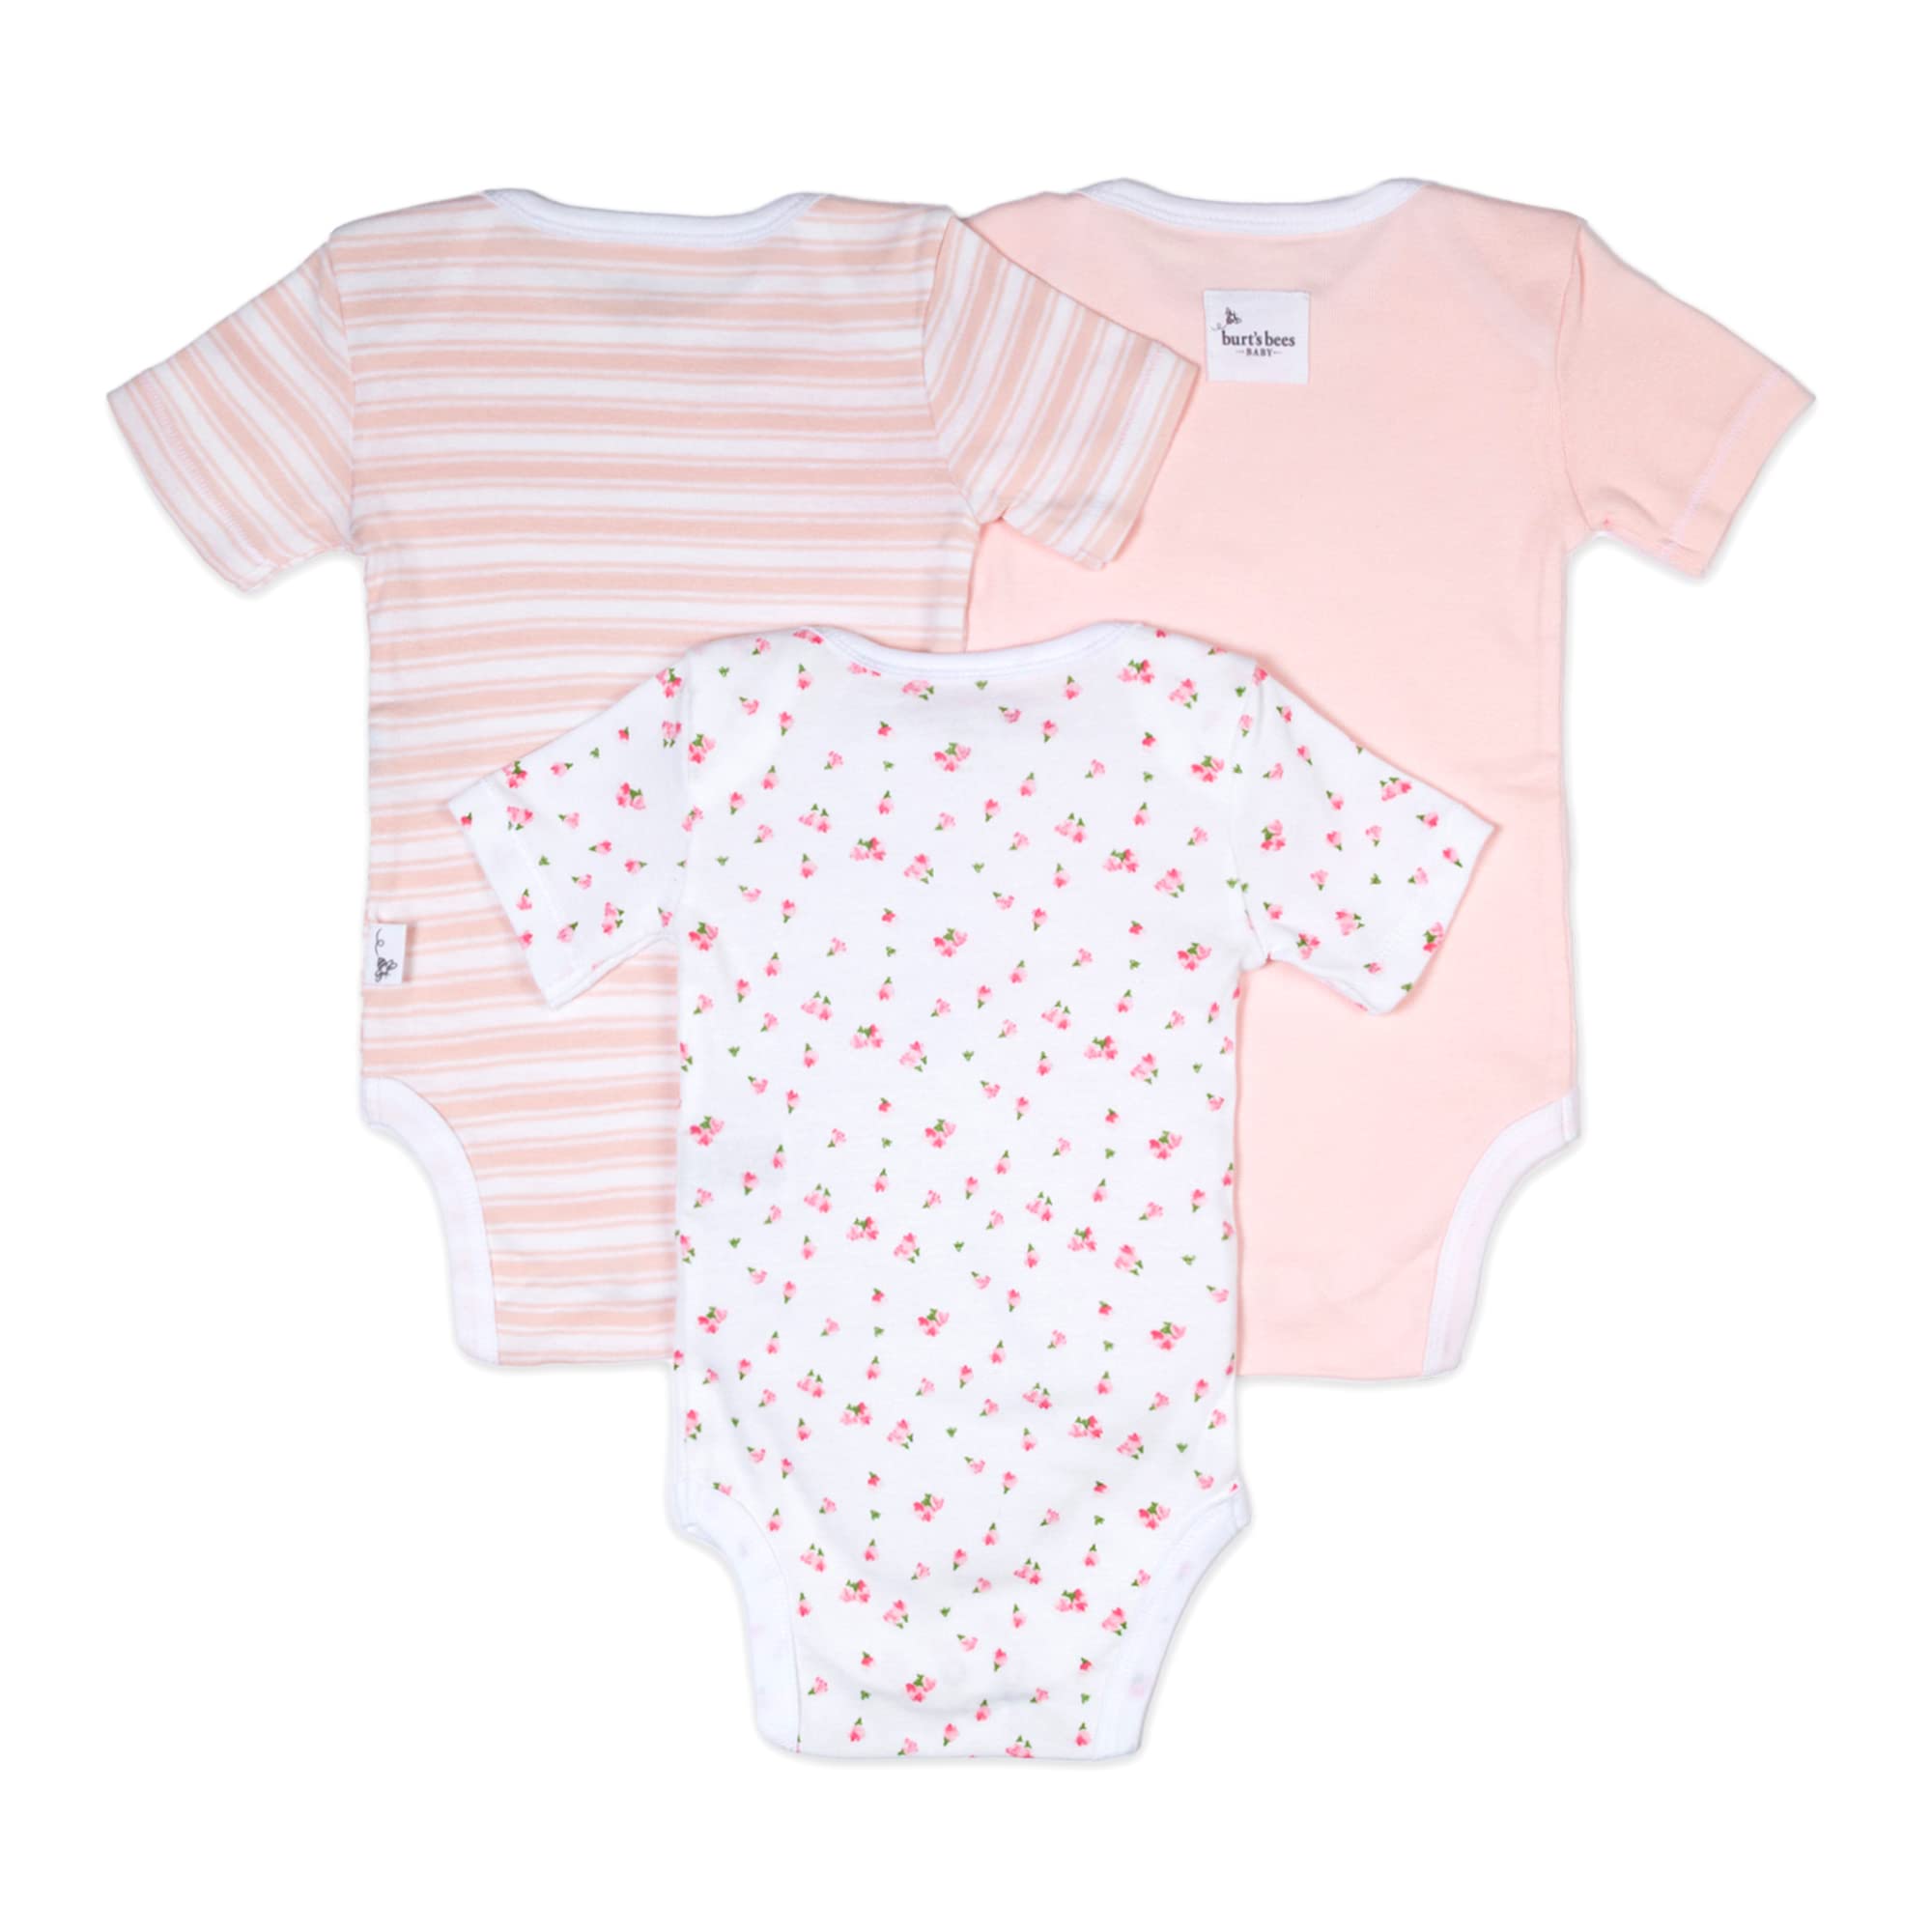 Burt's Bees Baby Unisex Baby Bodysuits, 3-Pack Long & Short-Sleeve One-Pieces, 100% Organic Cotton